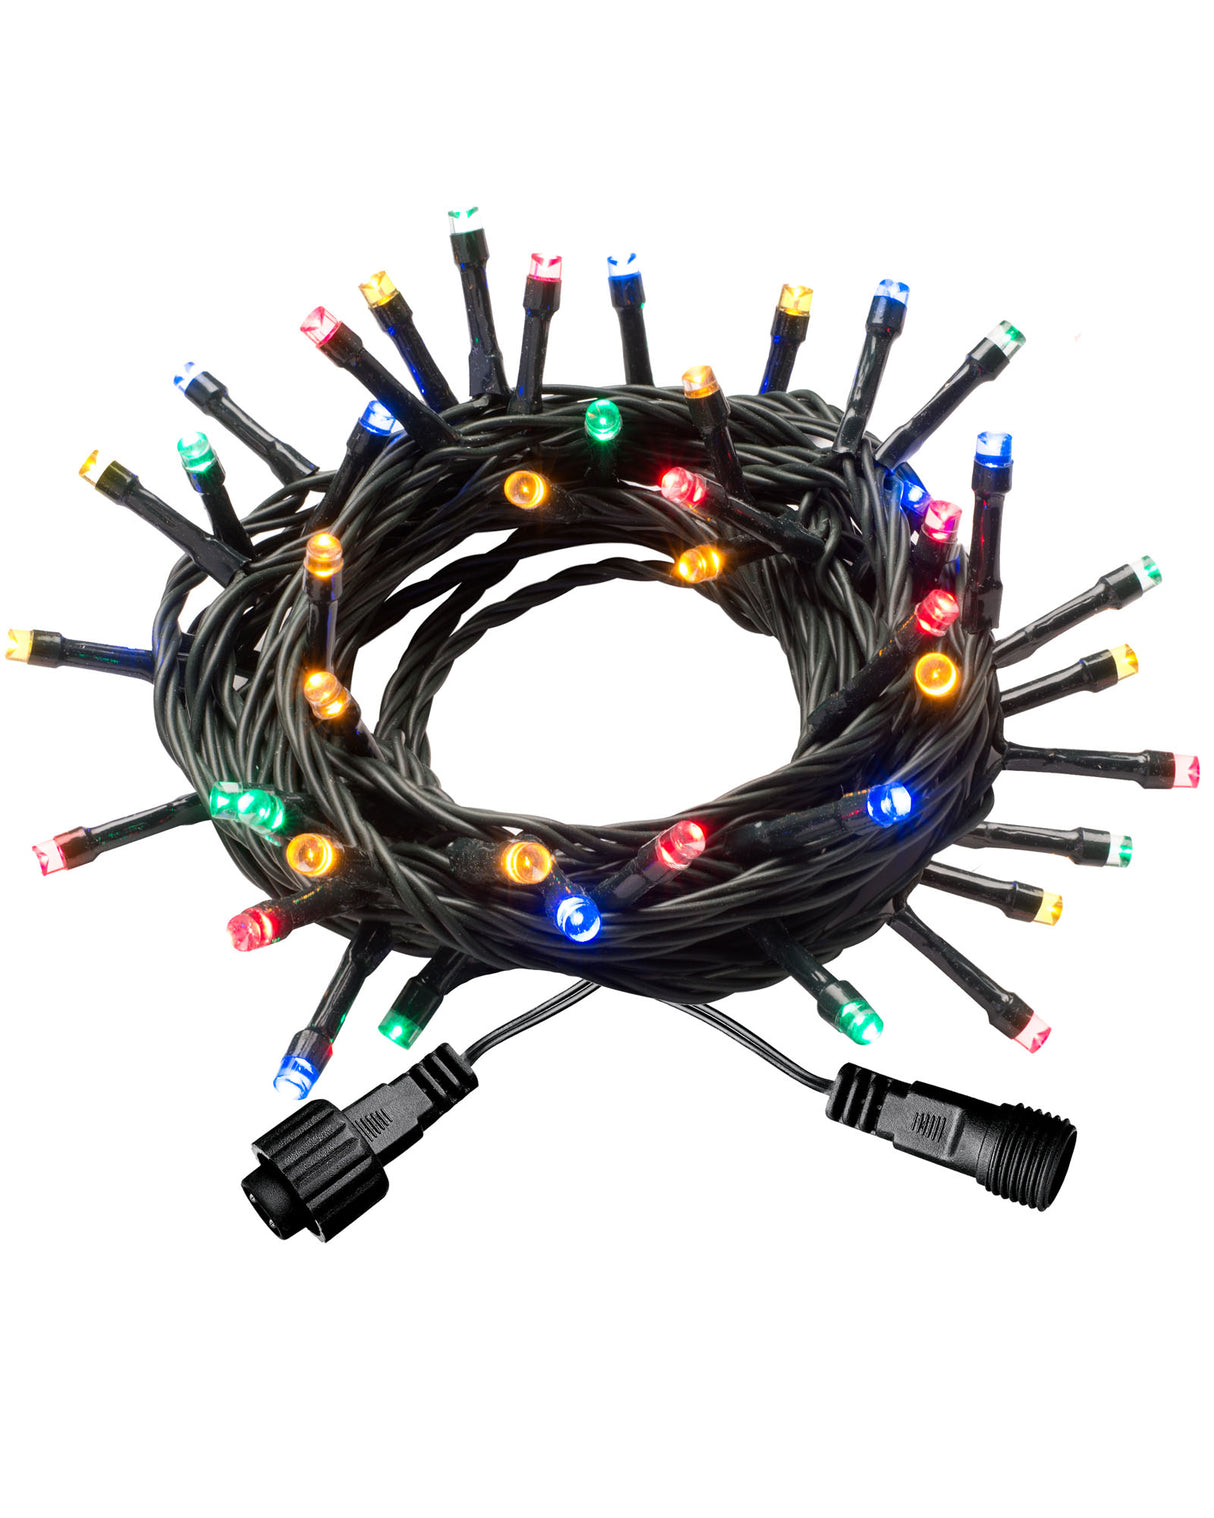 Multi-Function LED Connectable Light String, Multi-Coloured